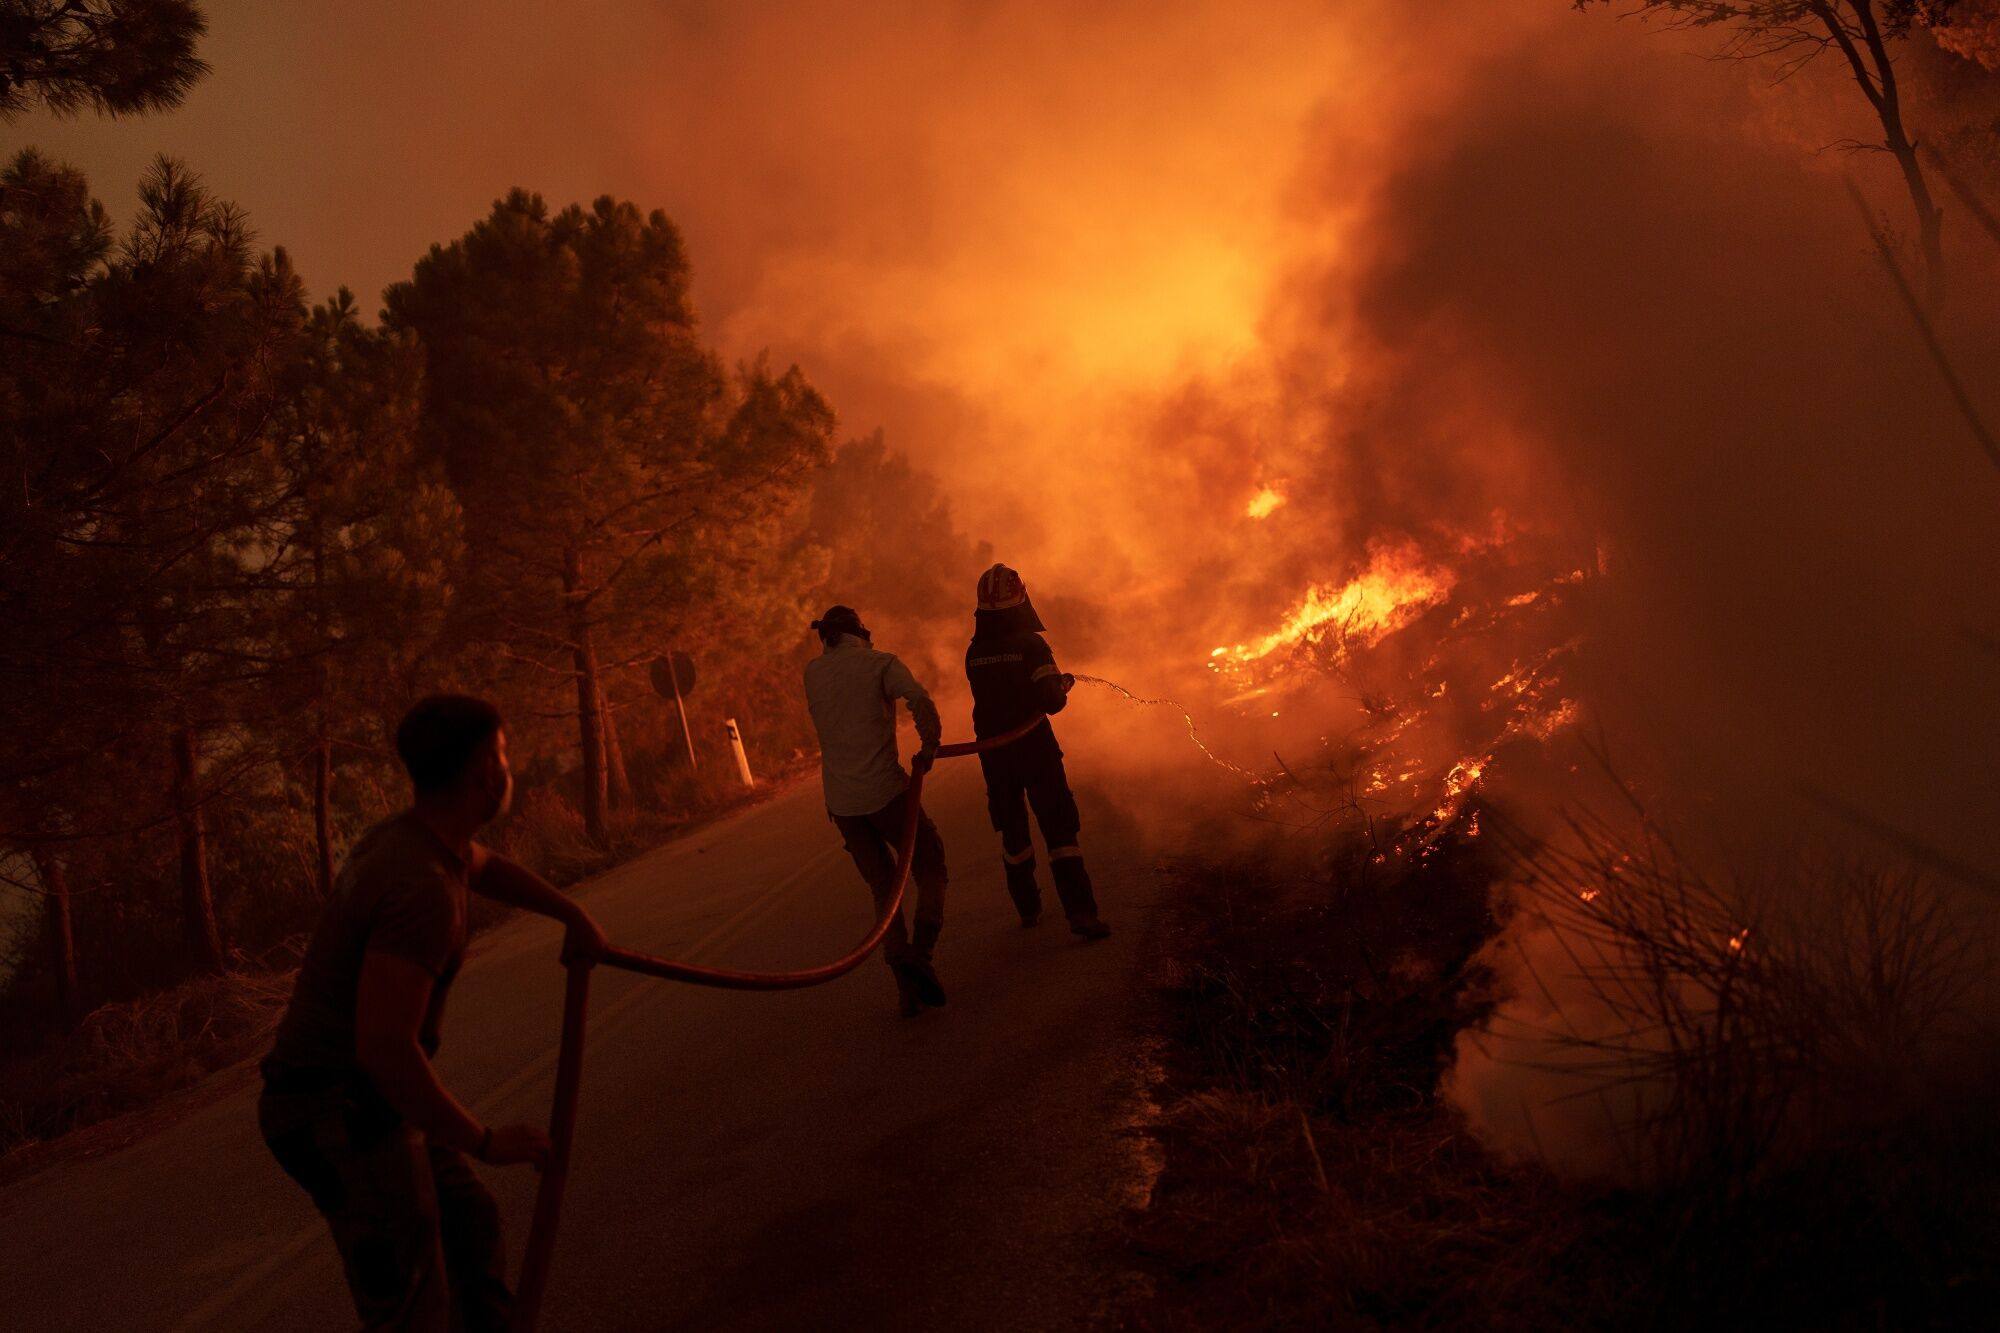 Firefighters and volunteers work to extinguish a wild fire near the village of Dikella, west of Alexandroupolis, Greece, on August 22. Photo: Bloomberg